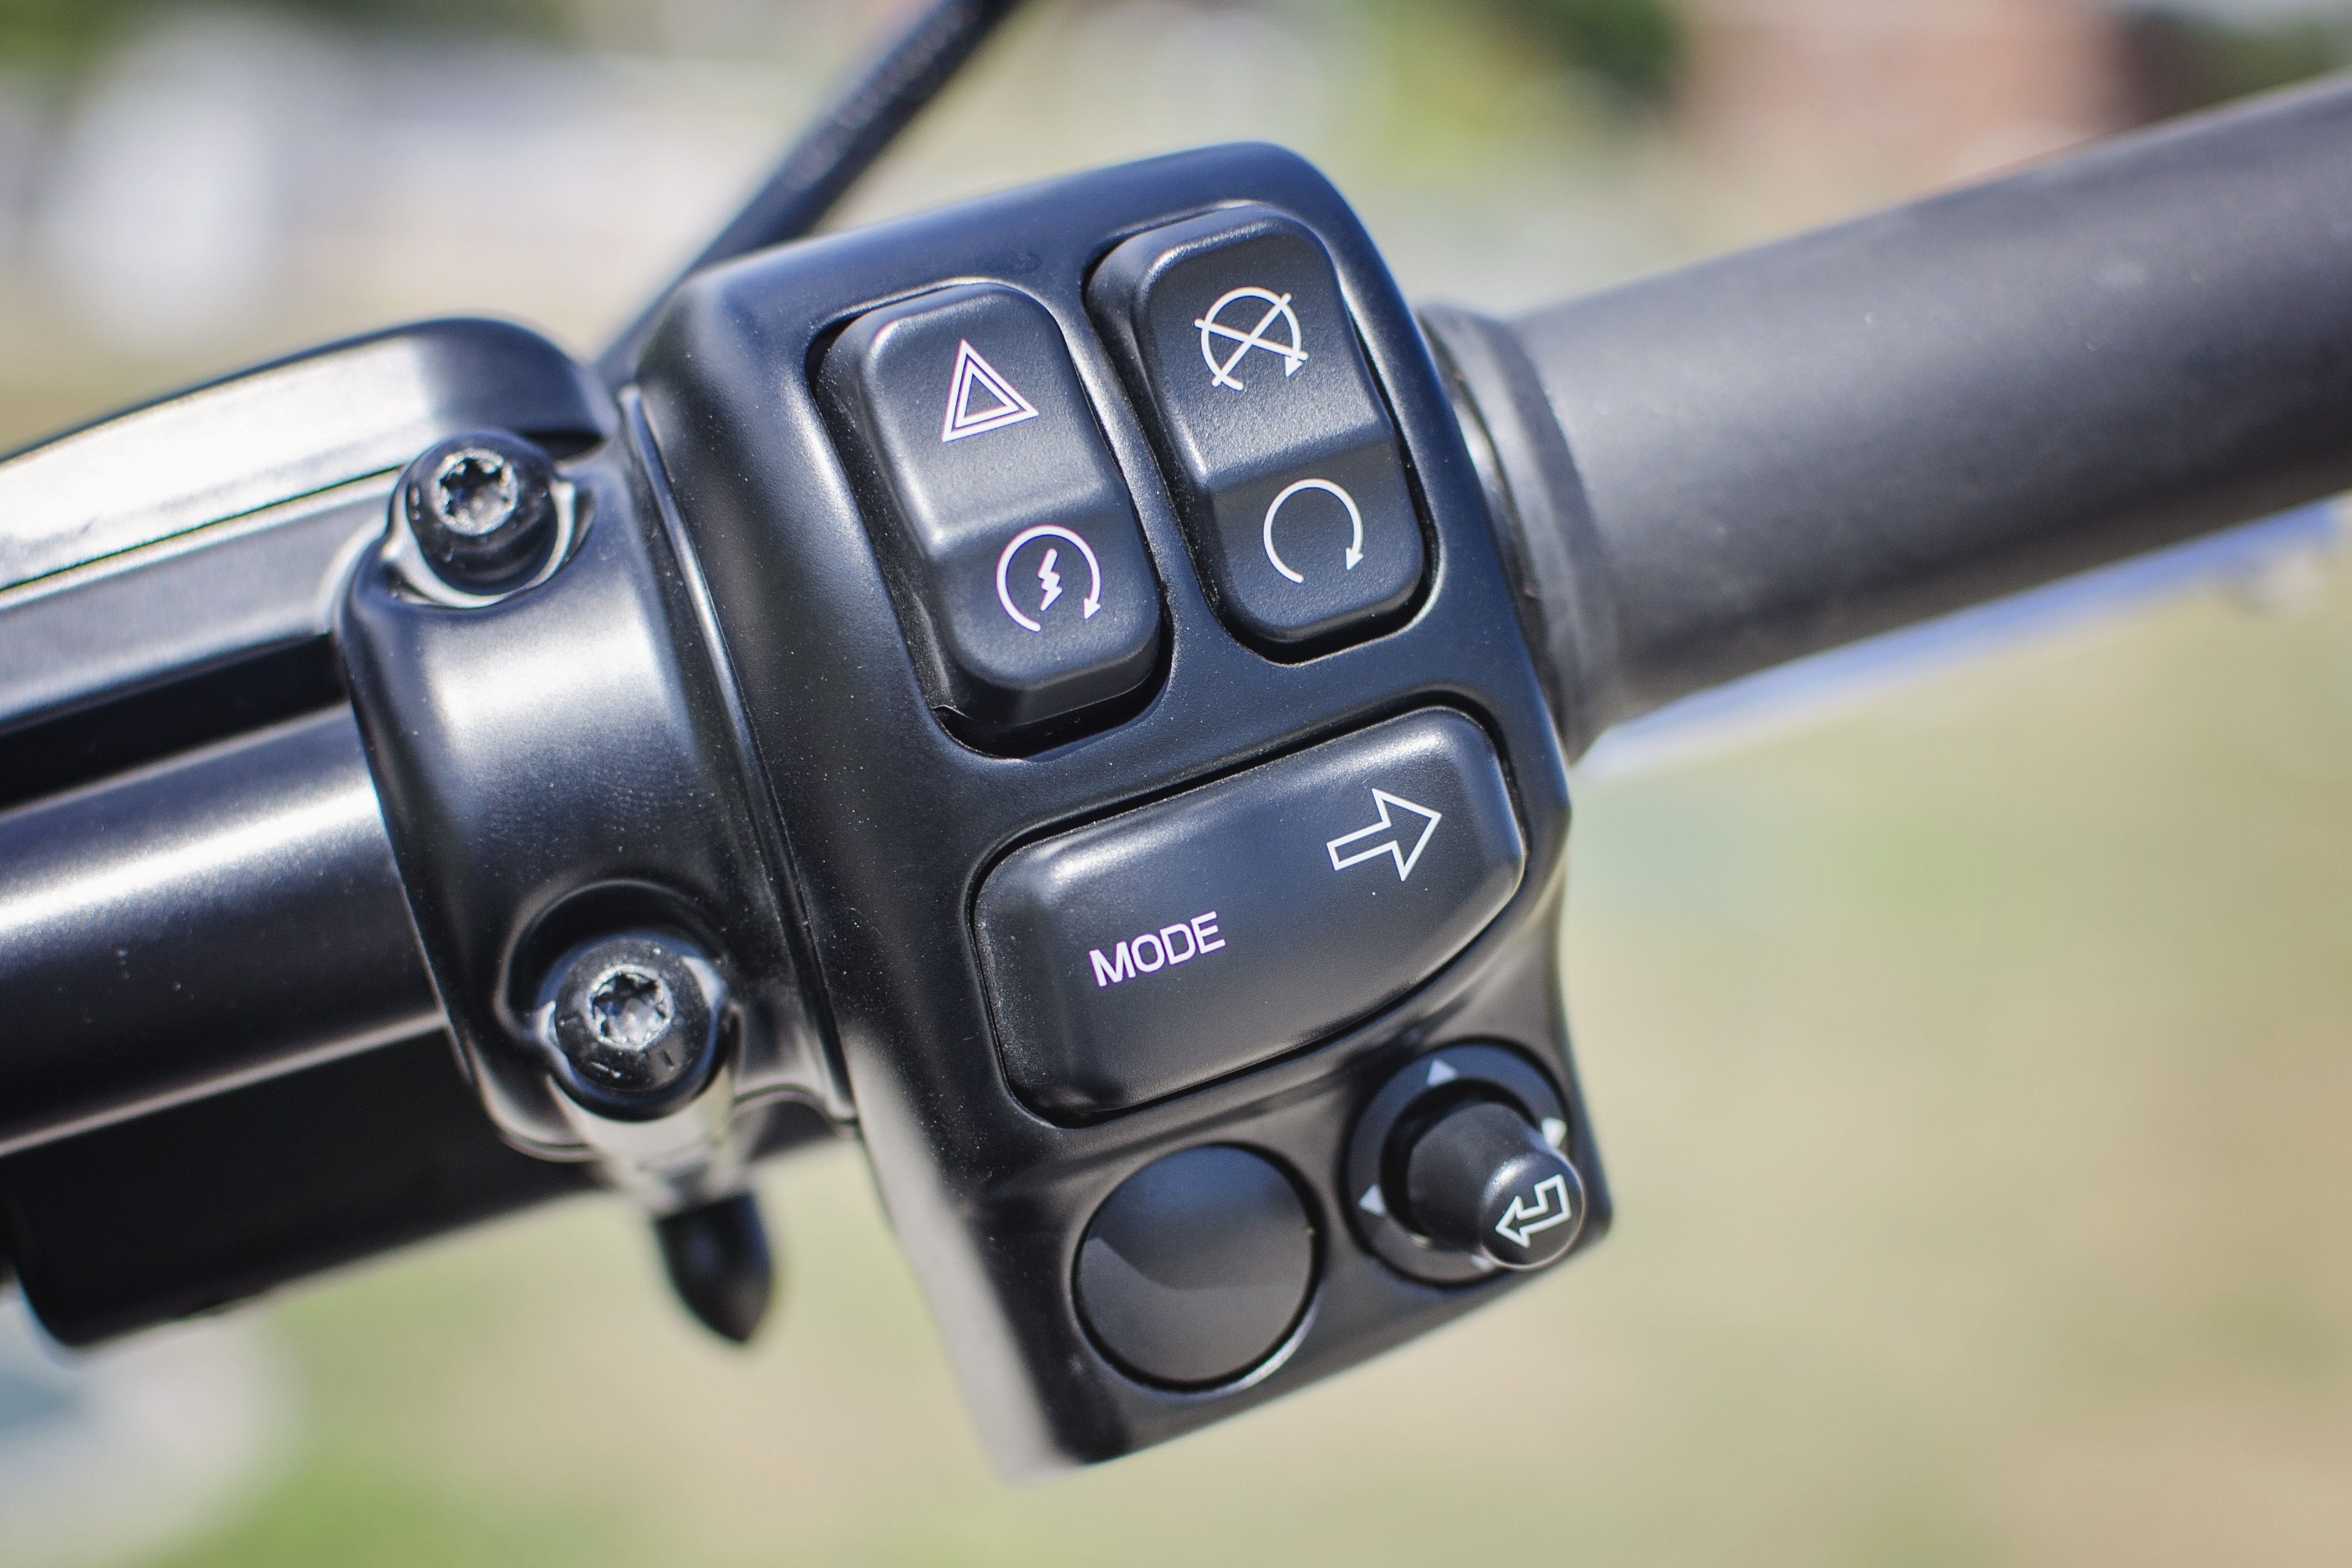 The Livewire Right Cluster allows you to change riding modes, display options, and sports the right turn signal.